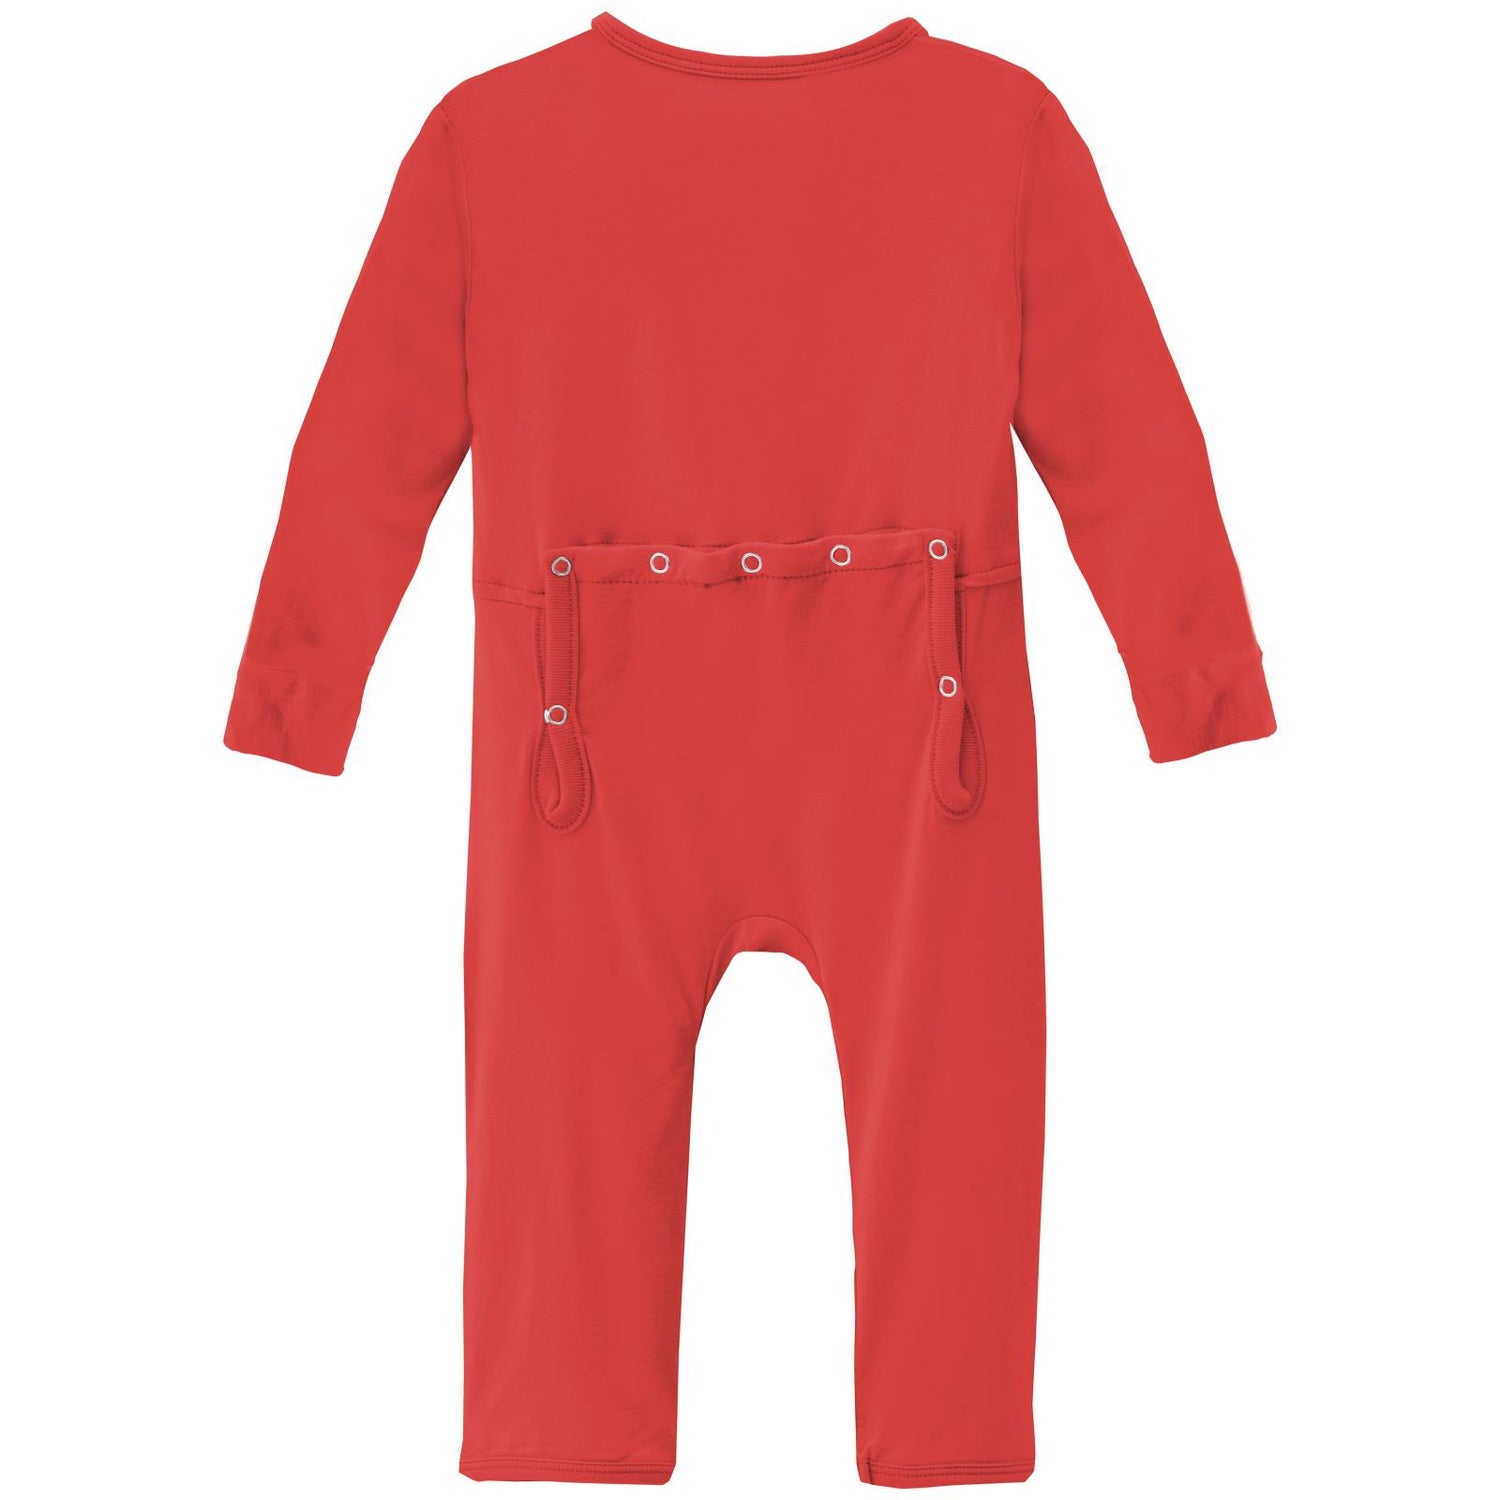 Coverall with Zipper in Poppy